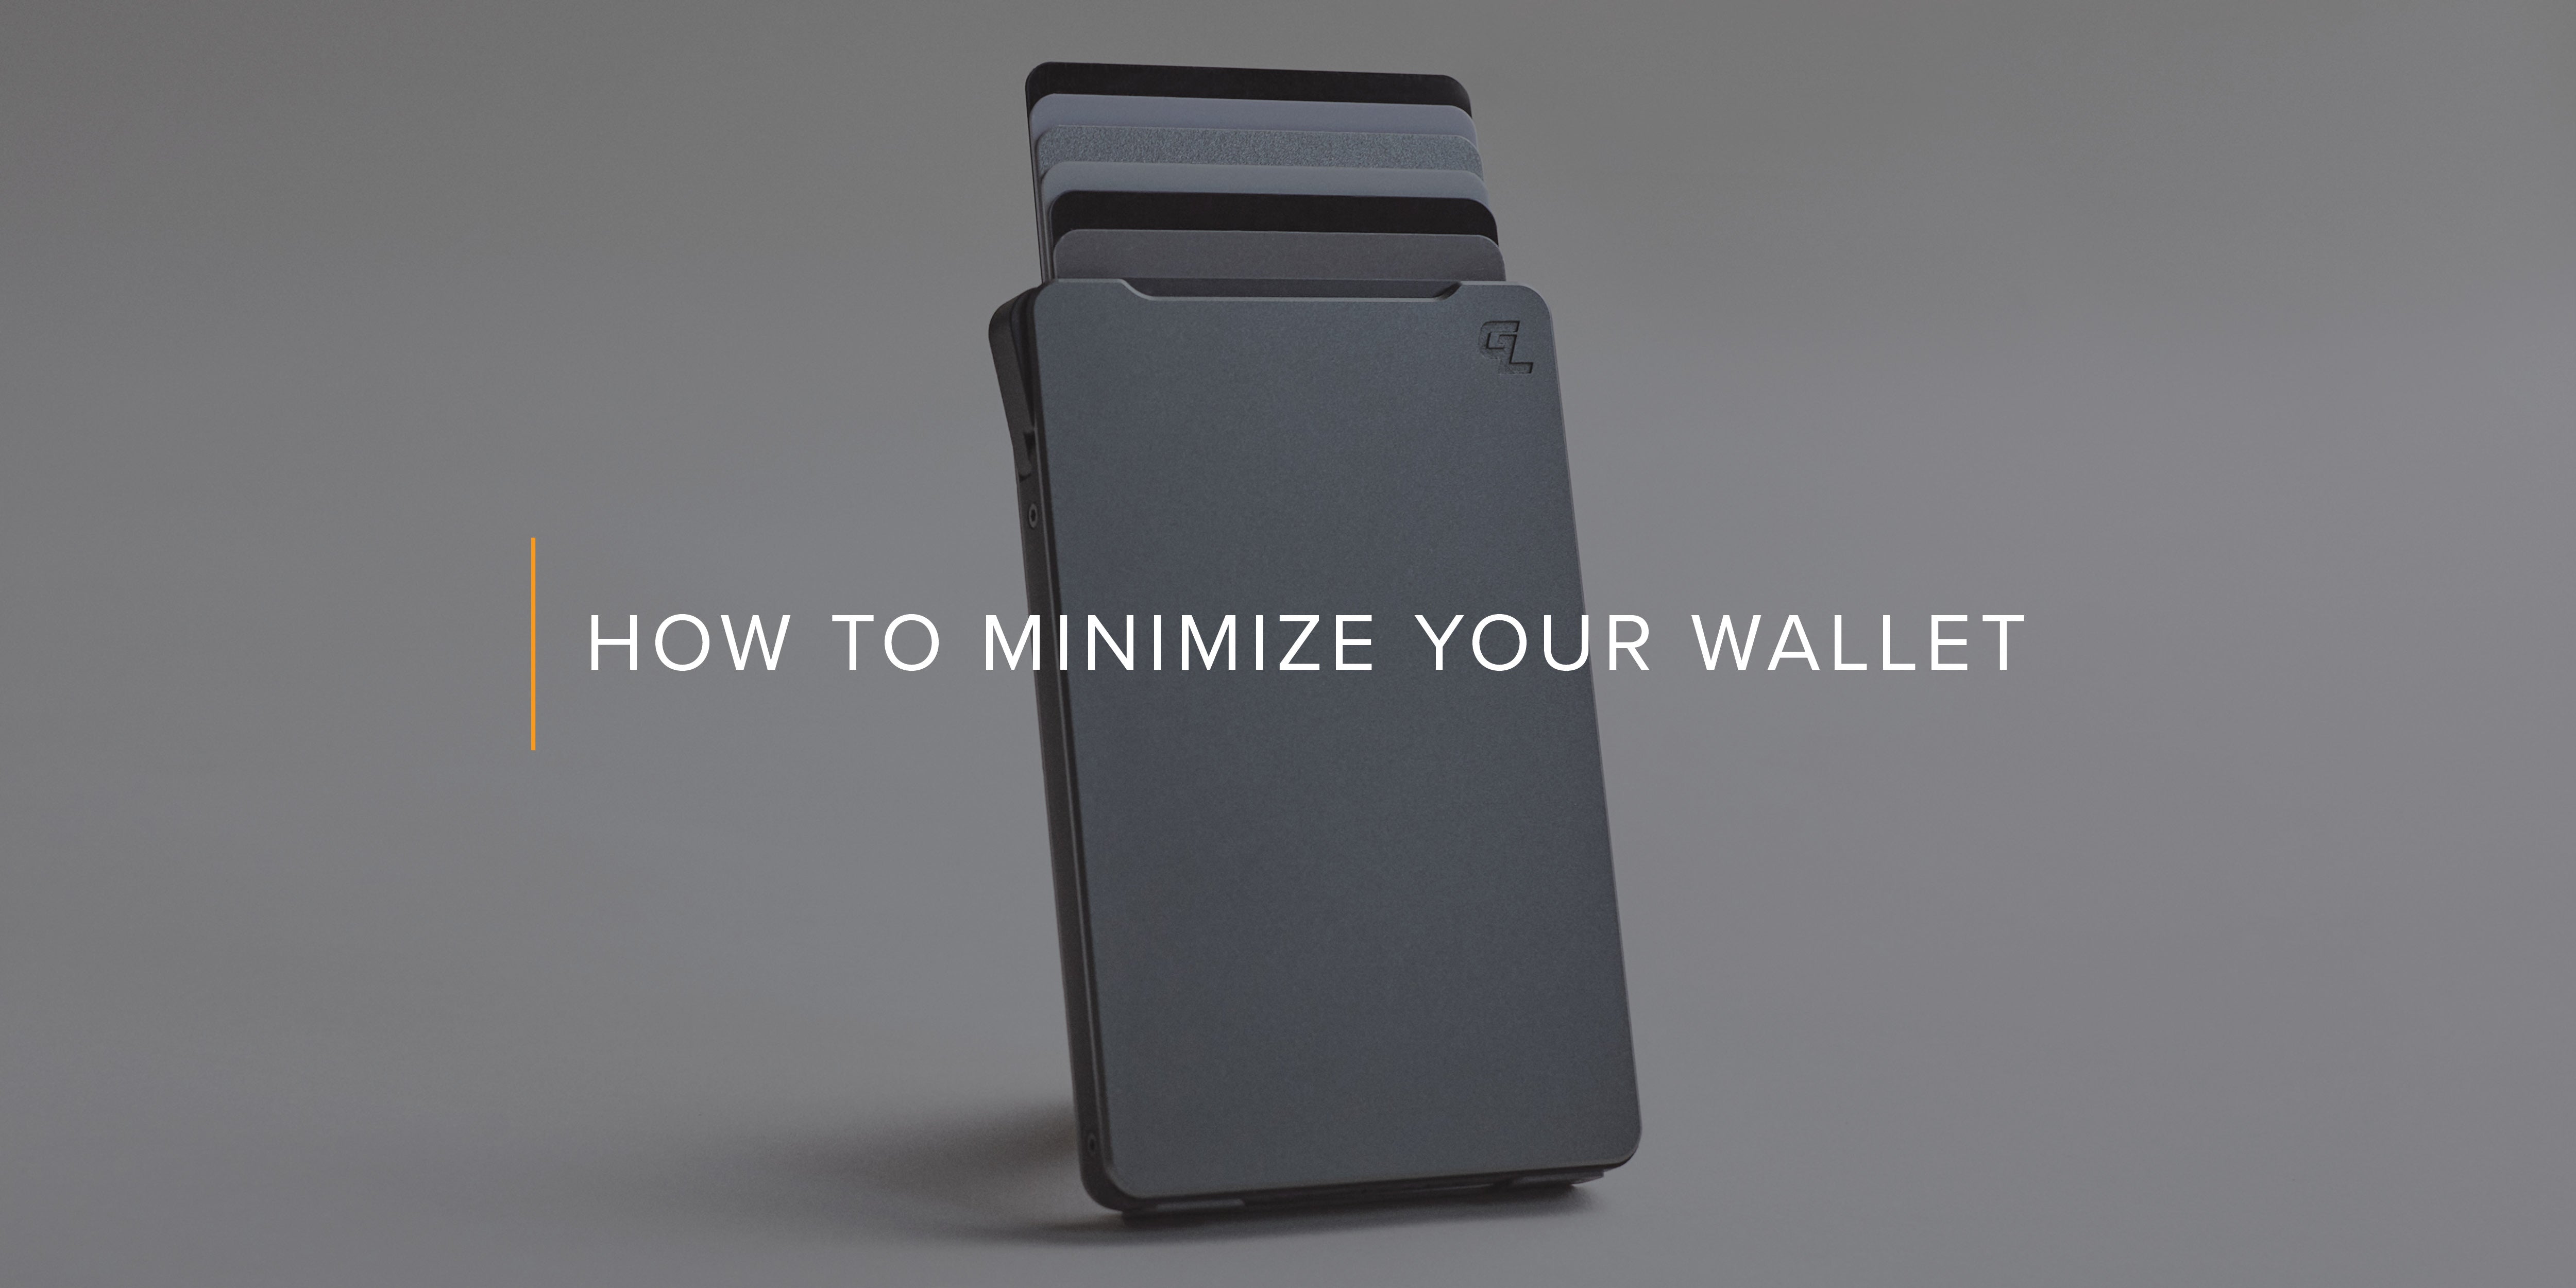 How to Minimize Your Wallet